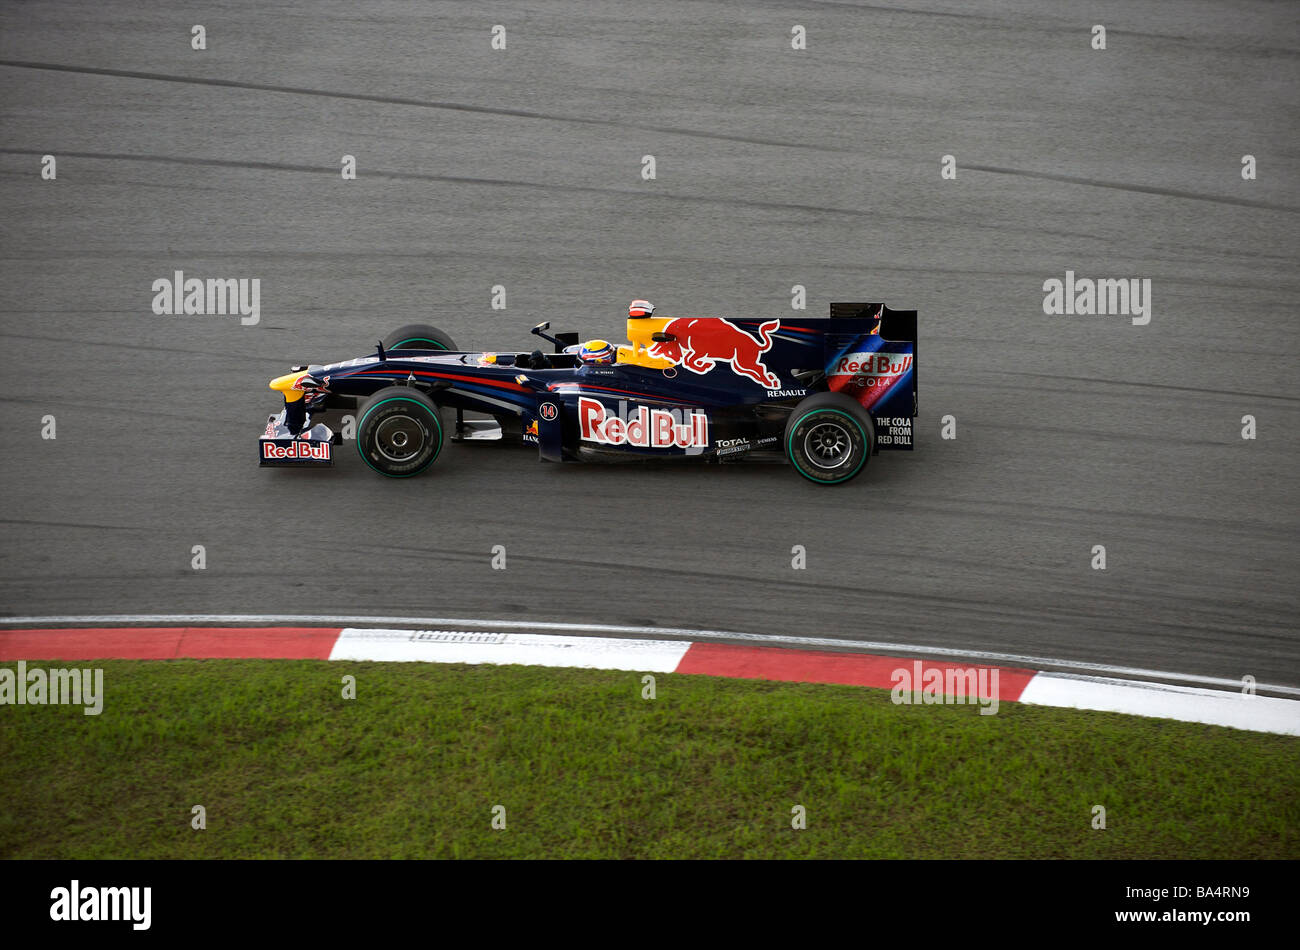 Red Bull Racing driver Mark Webber of Australia steers his car during the third practice session ahead the 2009 Fia Formula One Stock Photo